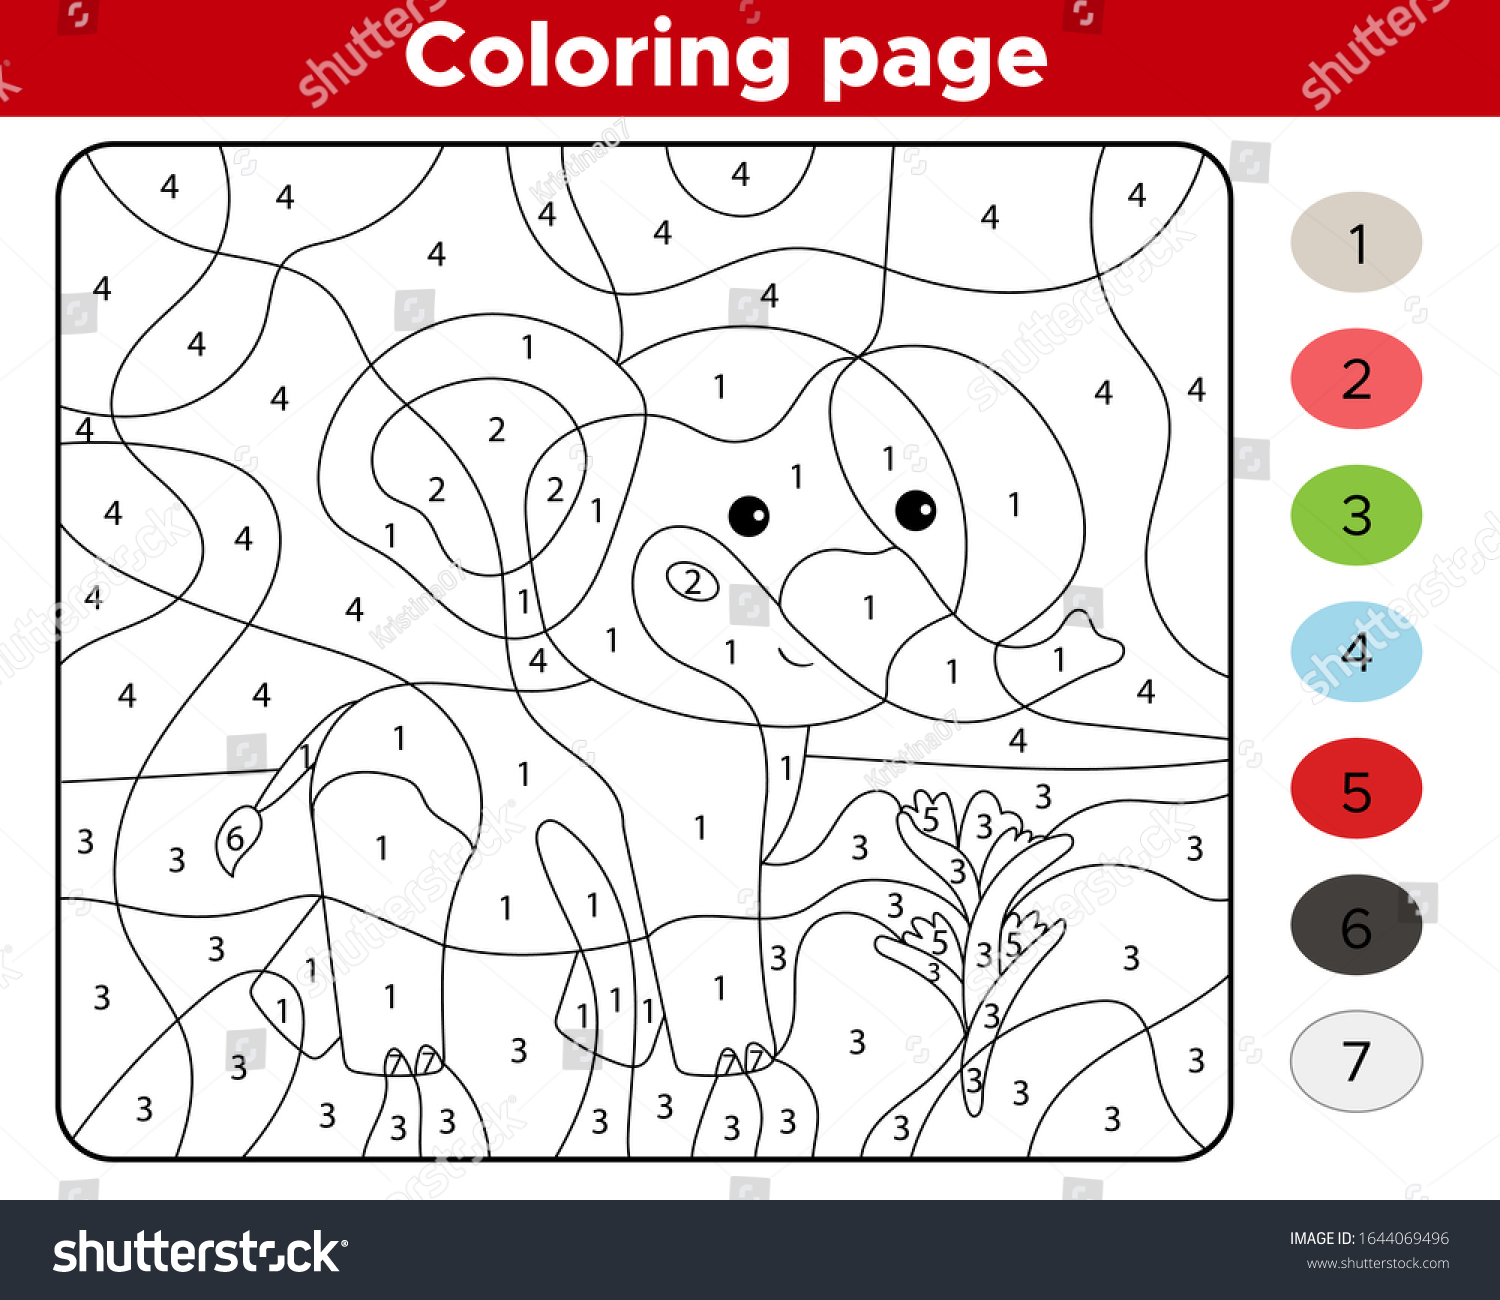 Number Coloring Page Cute Cartoon Elephant Stock Vector Royalty ...